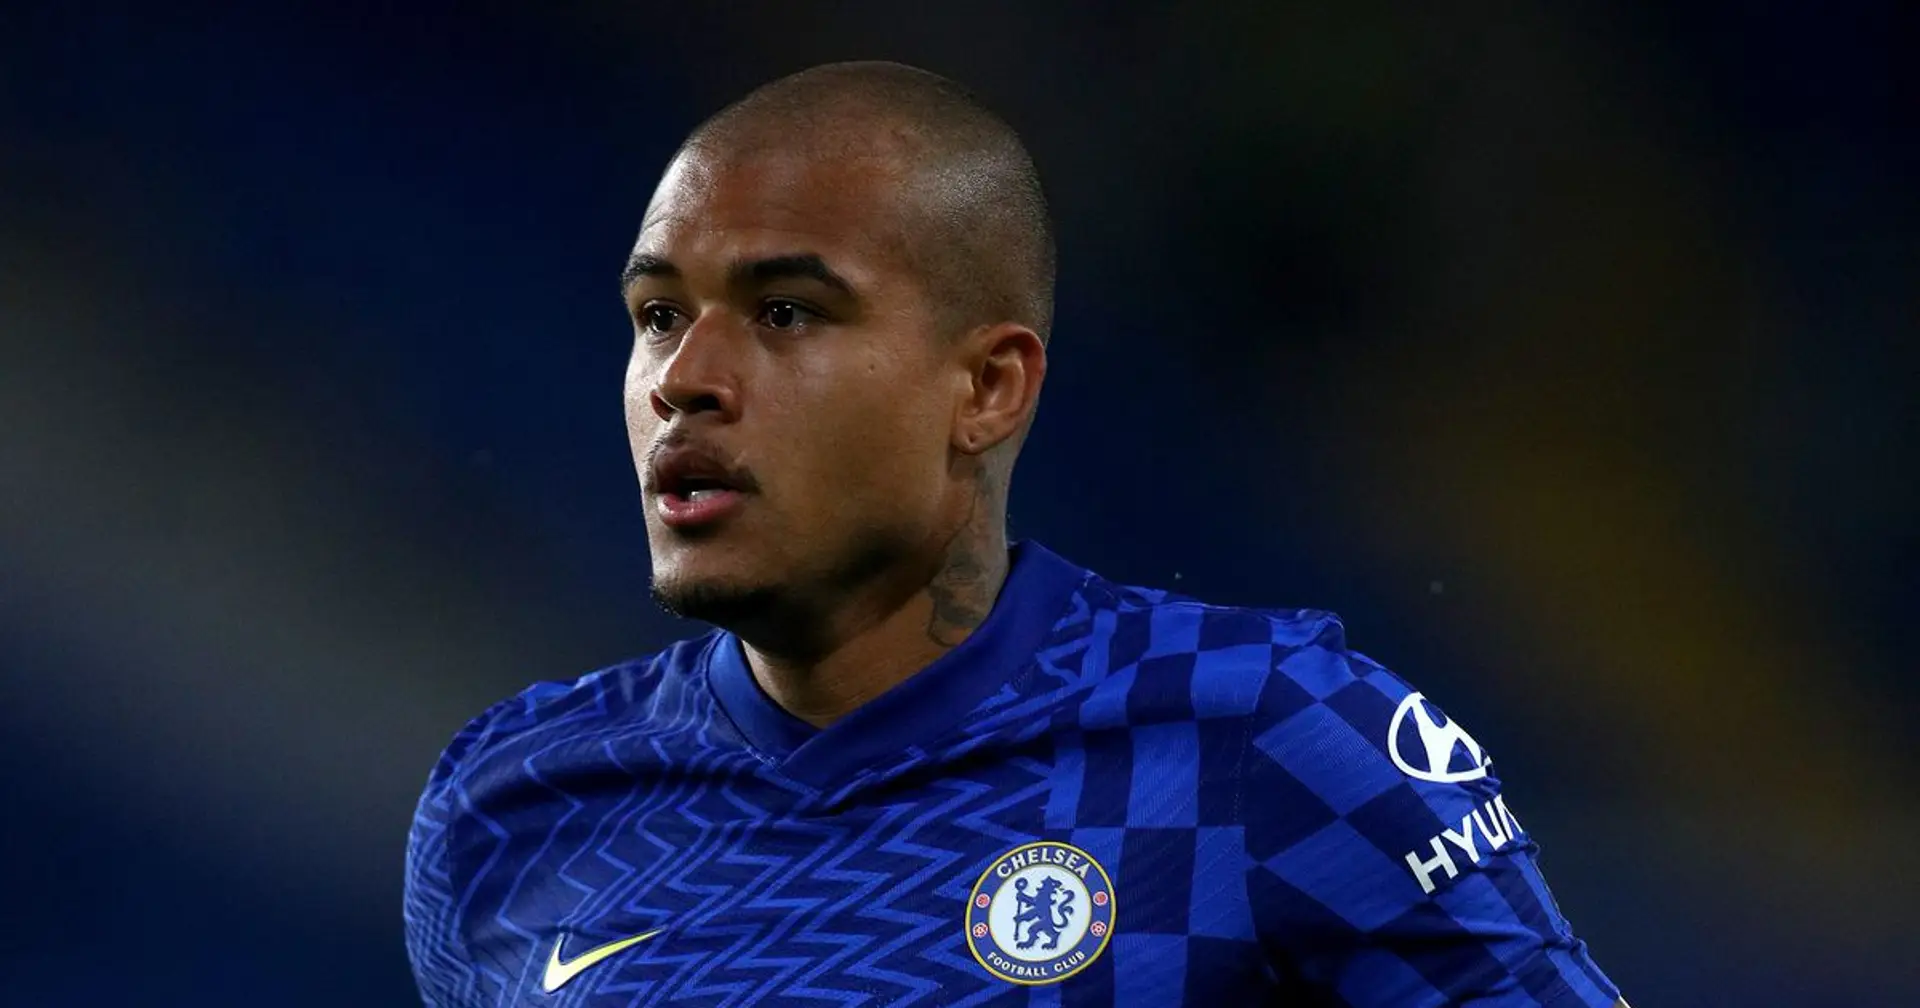 OFFICIAL: Kenedy leaves for Flamengo on loan, extends Chelsea contract